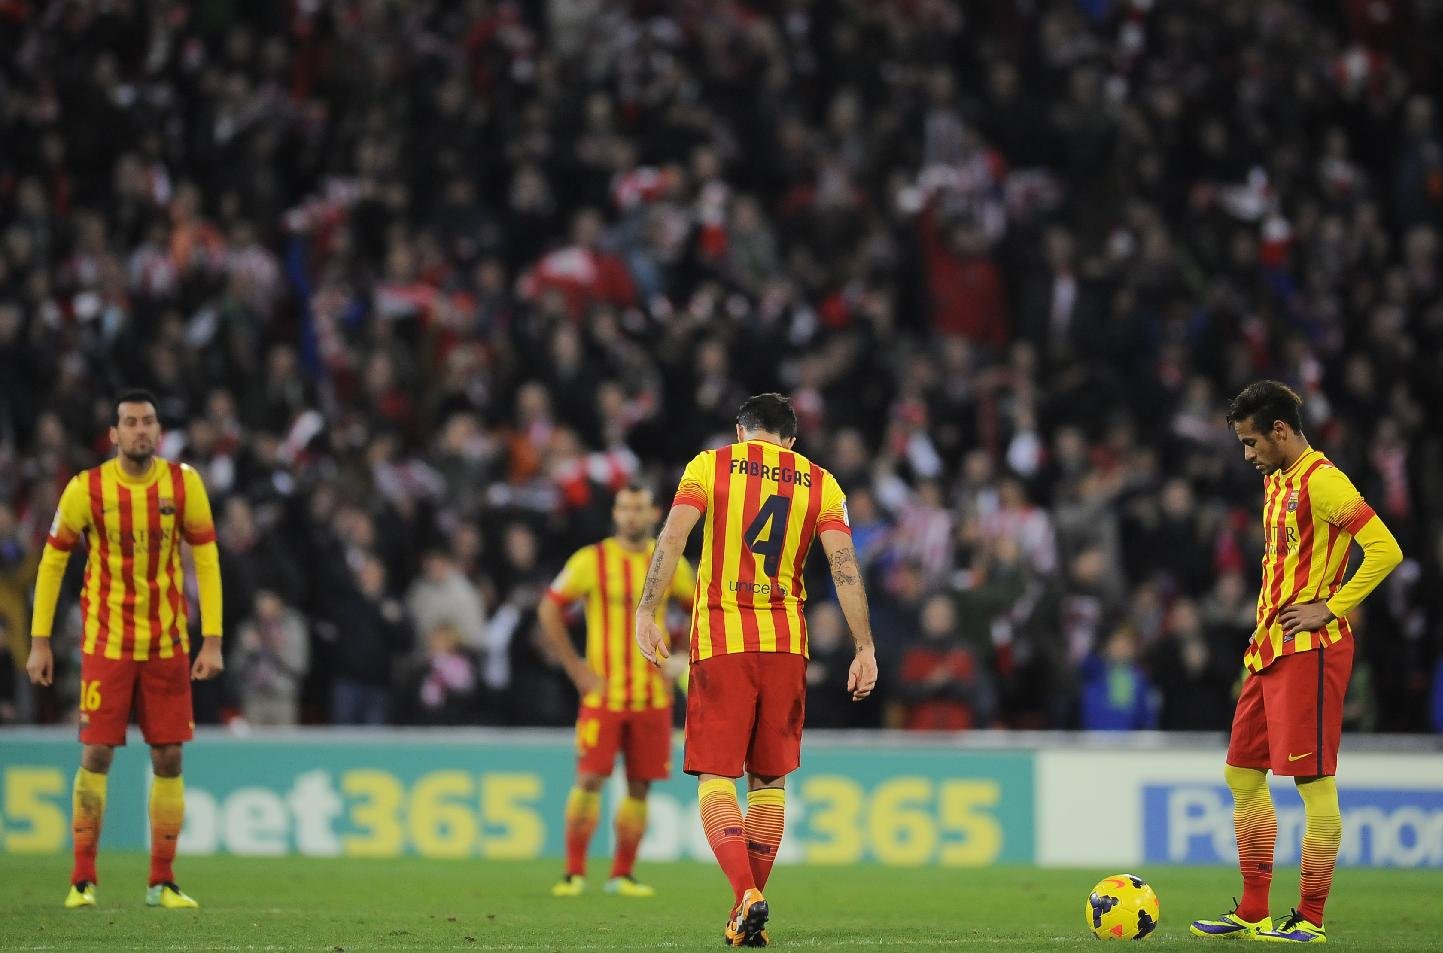 Barcelona players disappointment, after losing against Athletic Bilbao